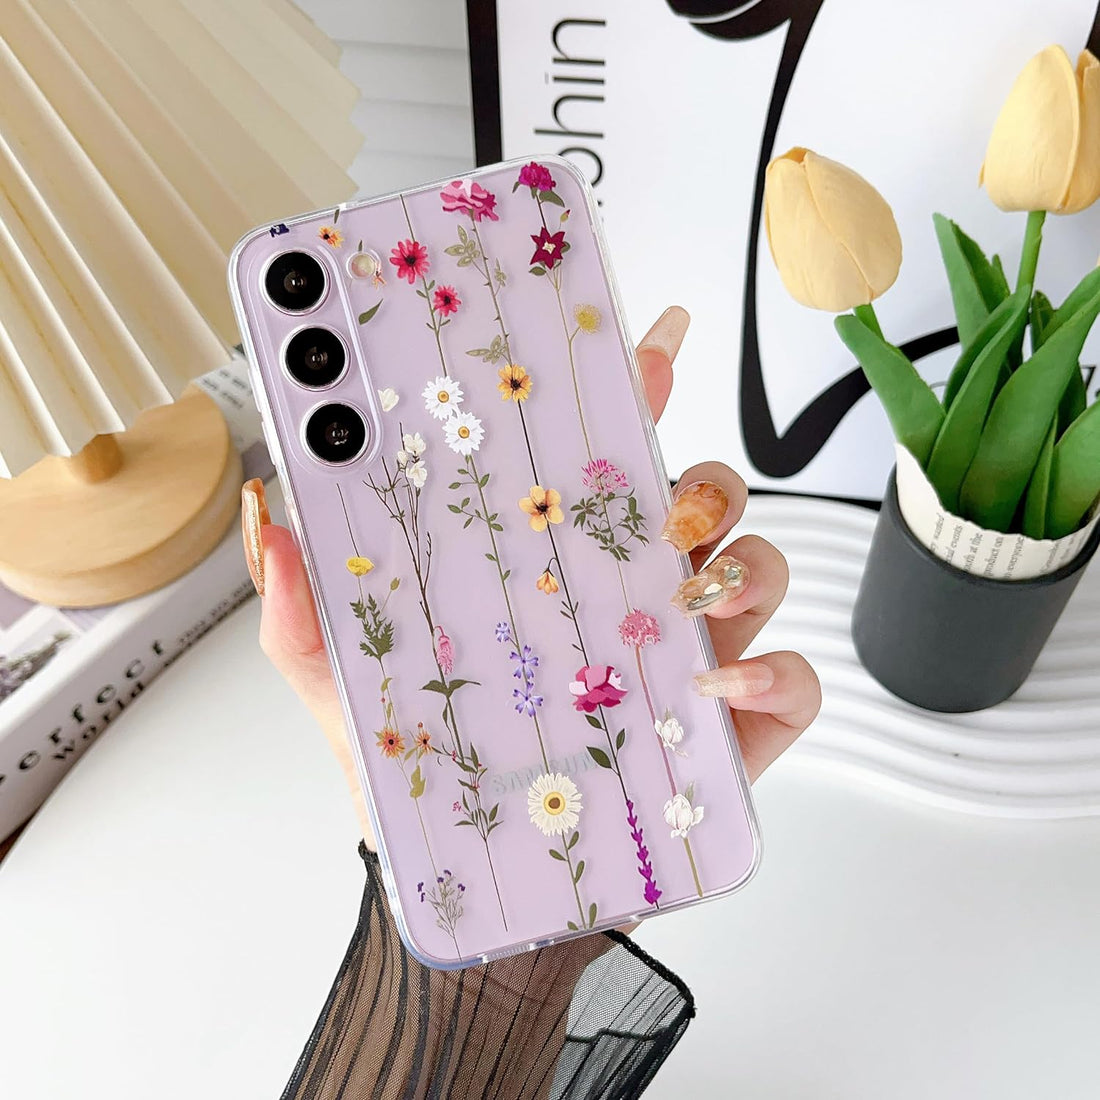 ZTOFERA Floral Case for Samsung Galaxy S23 Plus 5G,Cute Flower Pattern Case for Girls Women,Flexible Silicone Protective Slim Shockproof Bumper Phone Cover for Samsung Galaxy S23 Plus,Clear